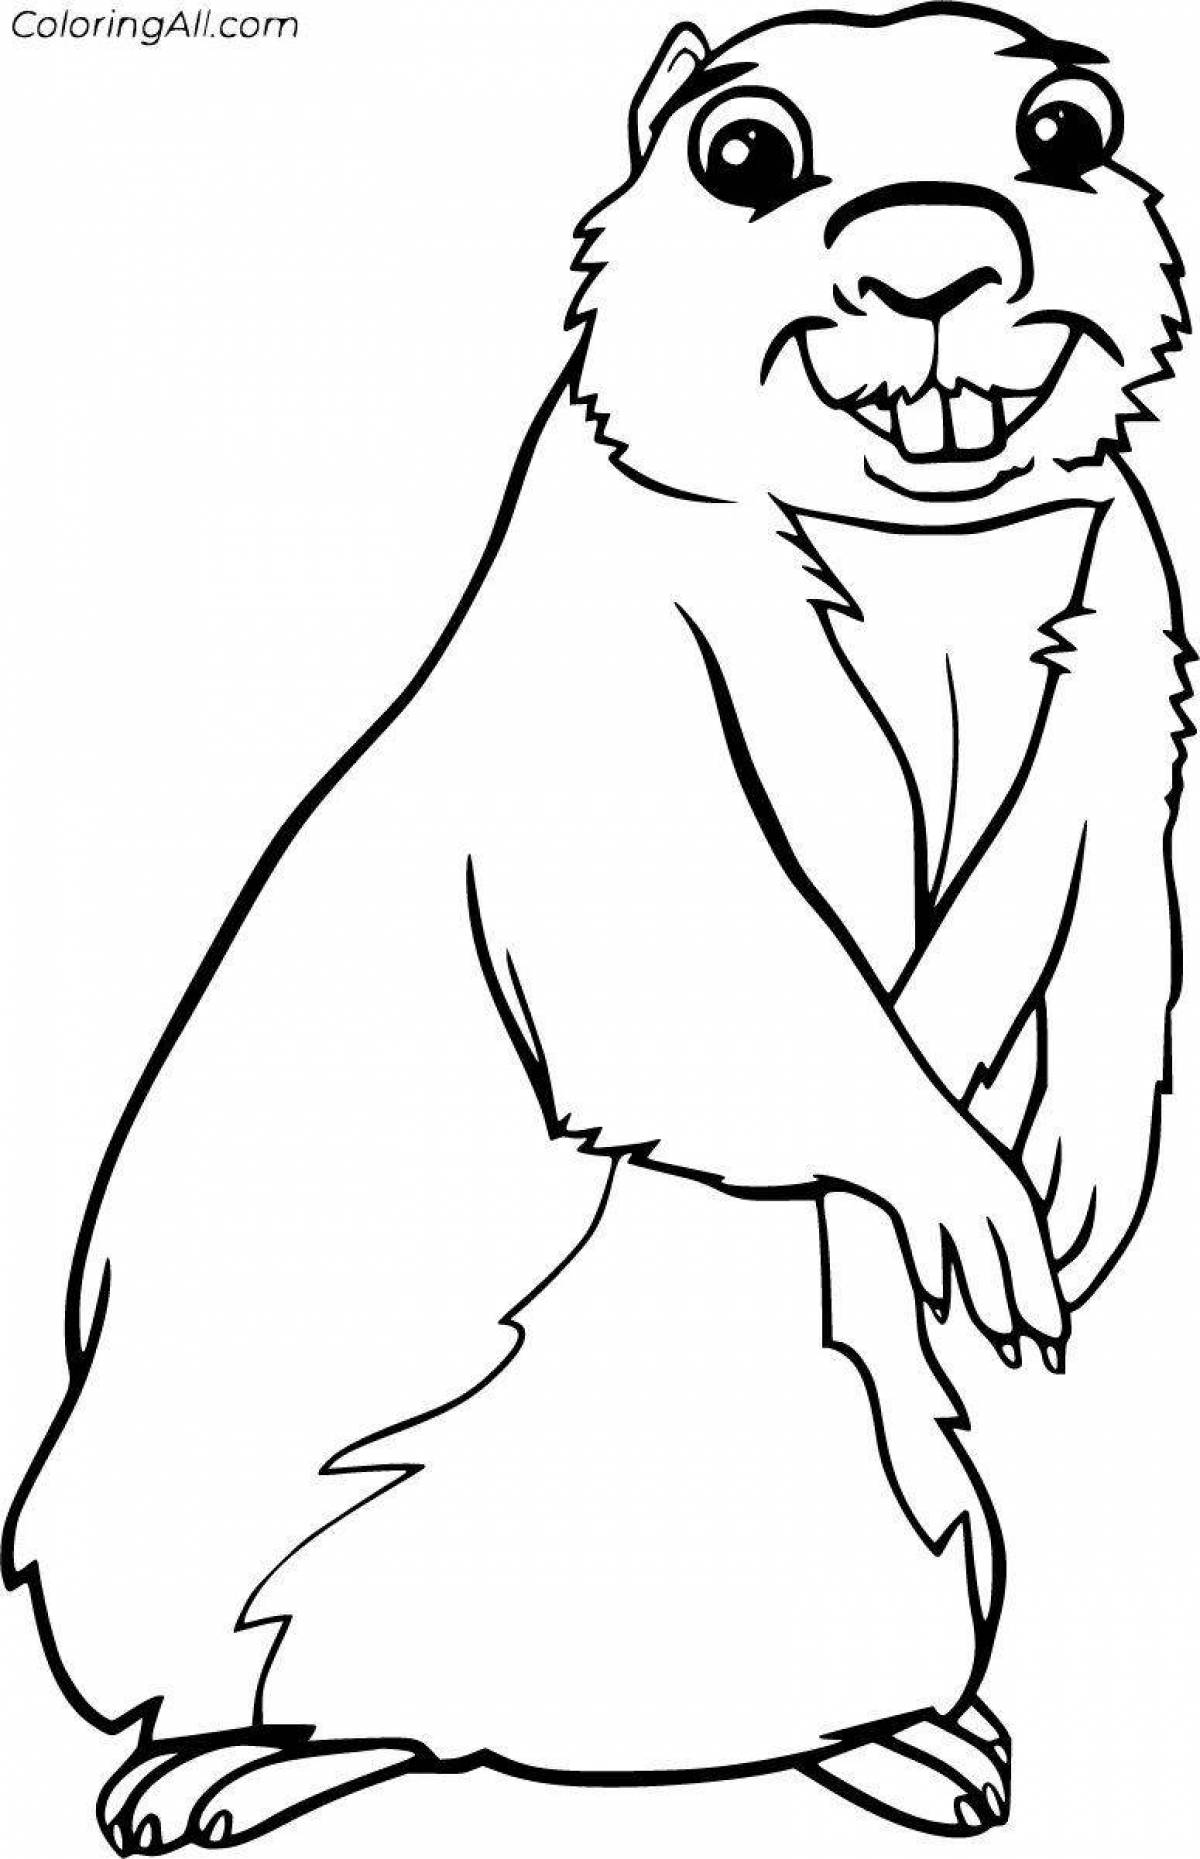 Great gopher coloring book for kids